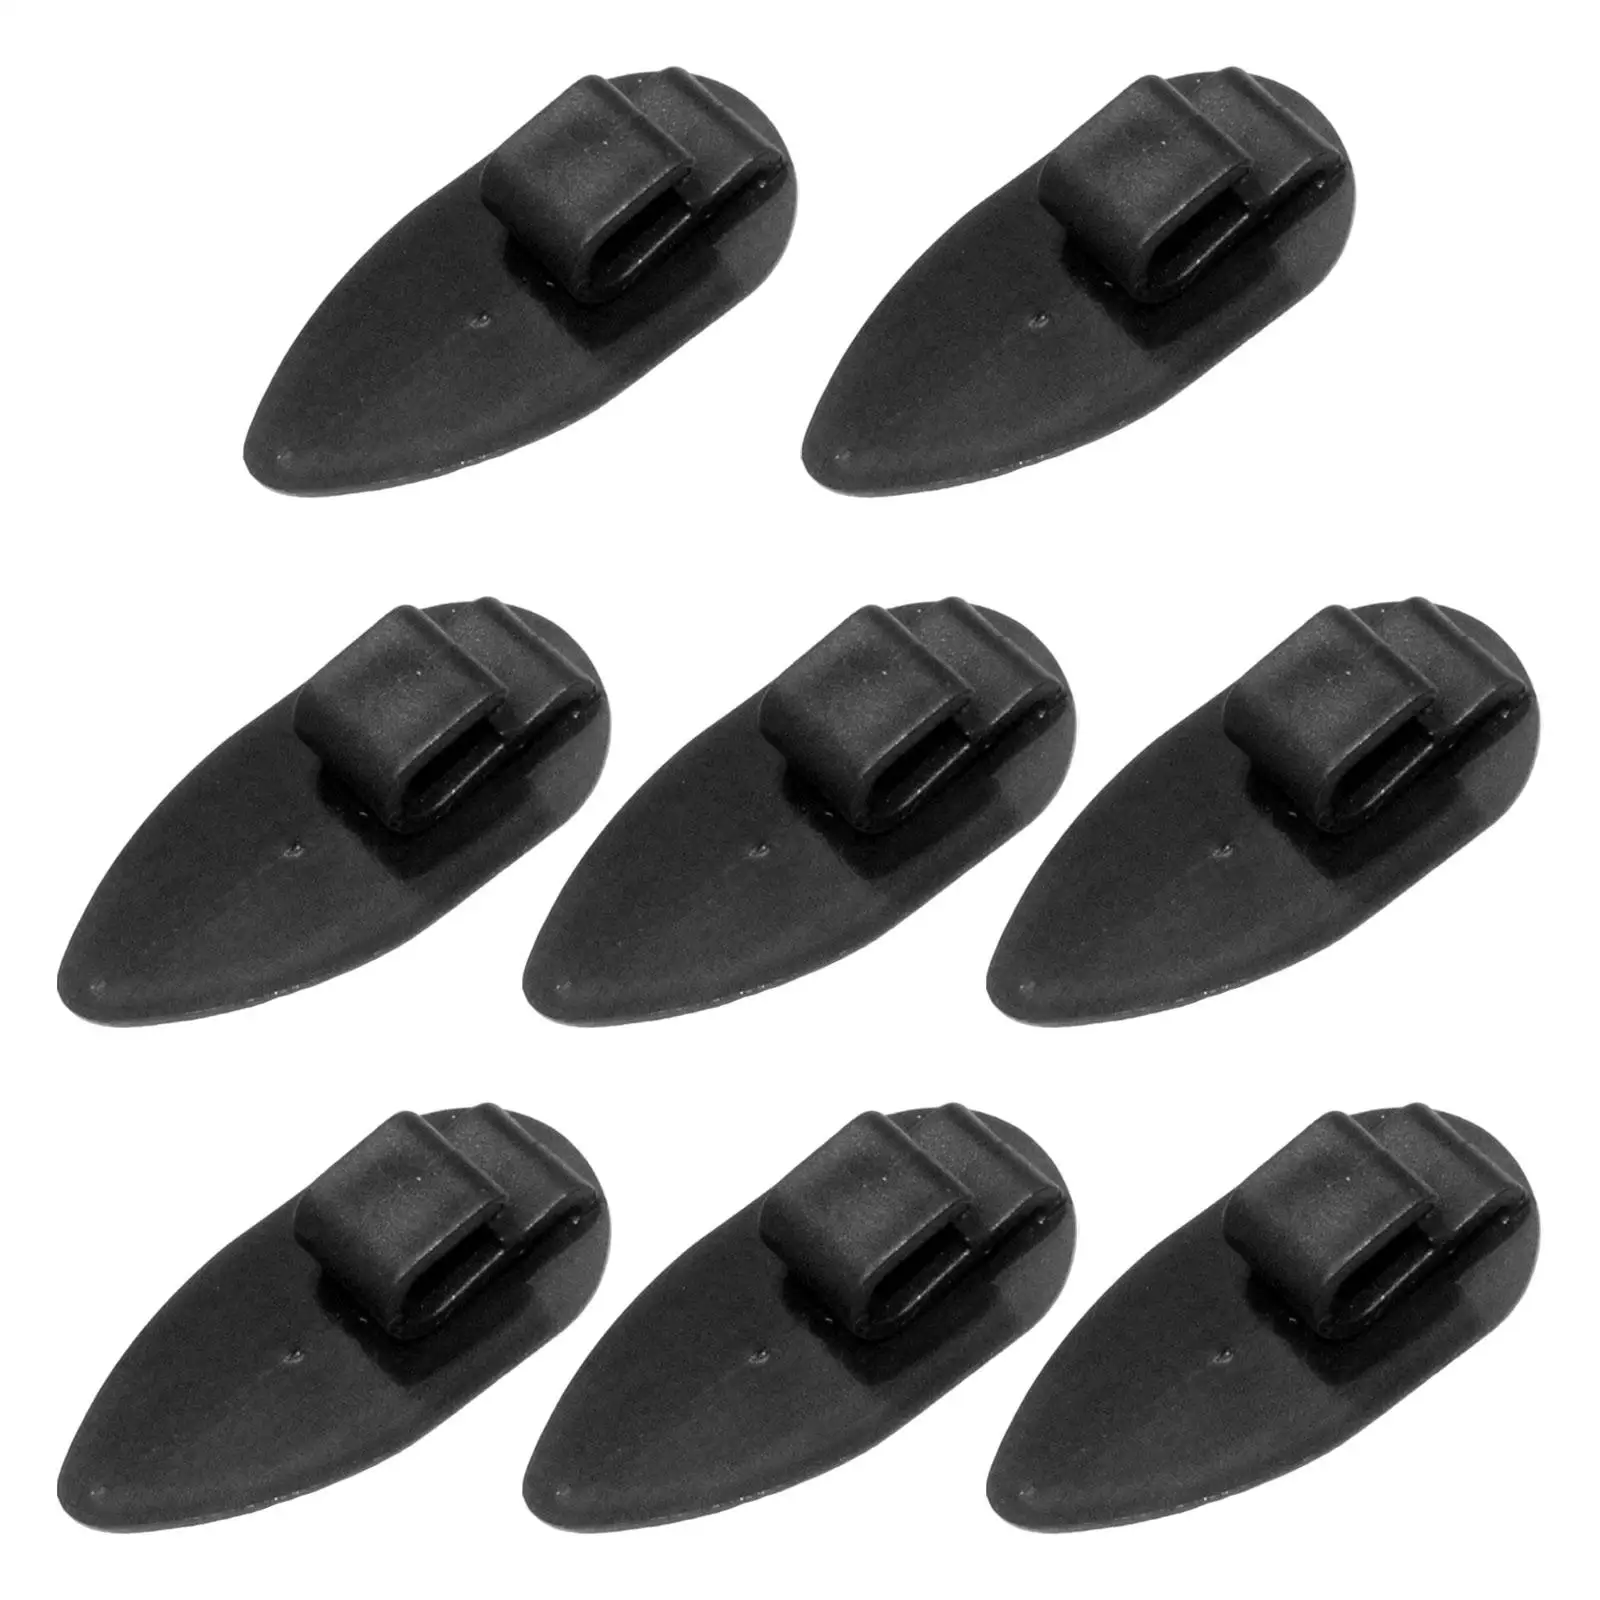 8x Floor Mat Retainer Clips Anti Skid Mat Fastener Clips for Car Mats Auto Accessories Replaces Quality Easy Installation